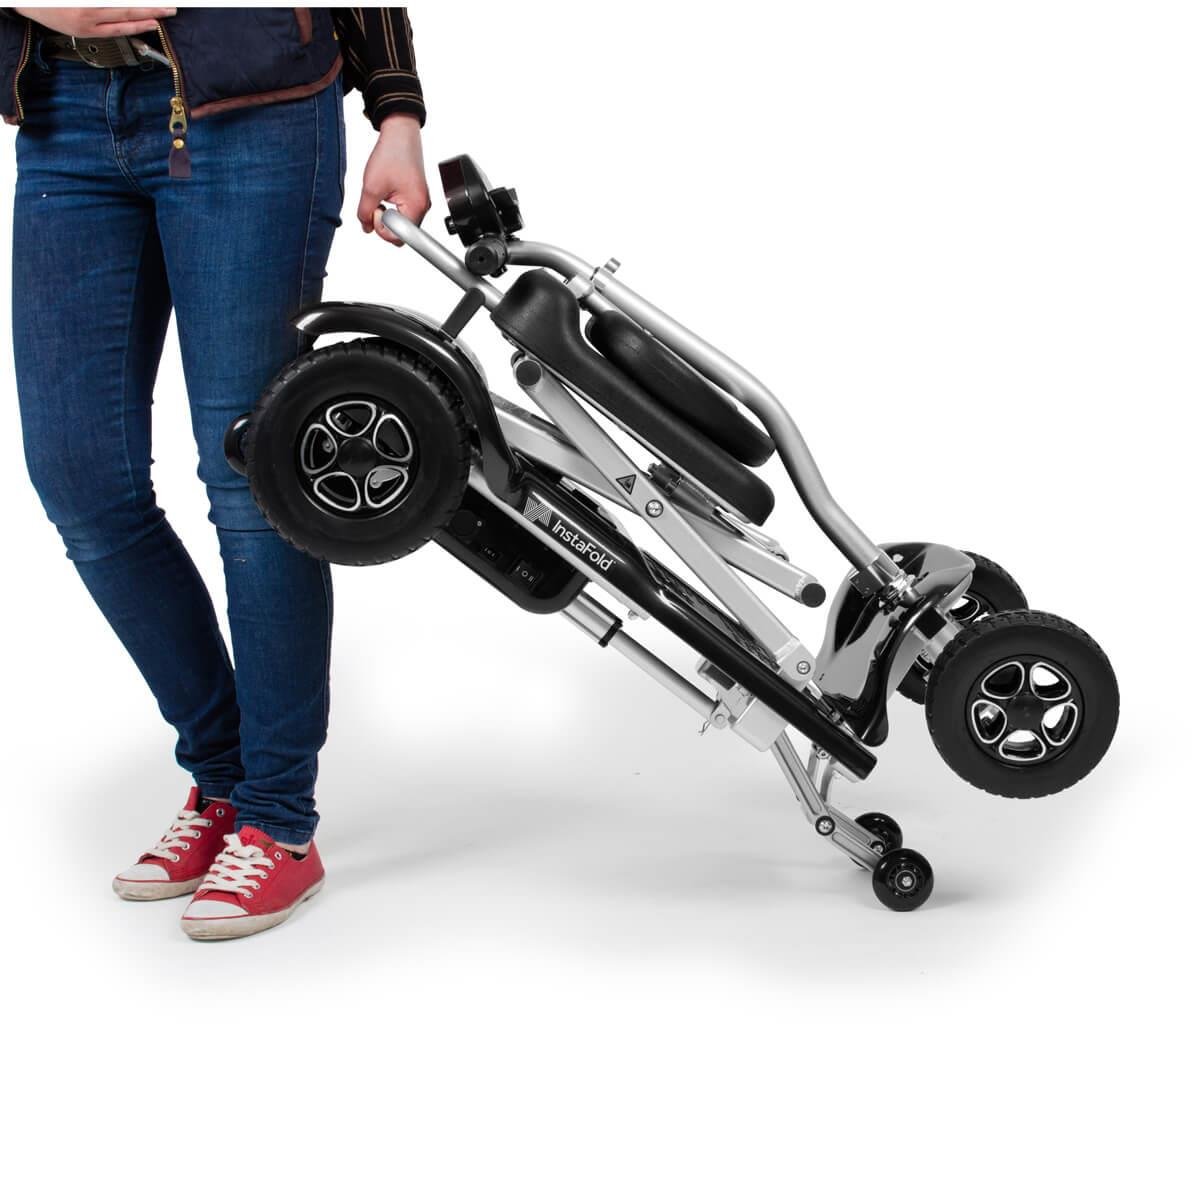 lightweight foldable mobility scooter, folding lightweight mobility scooter, lightest folding mobility scooter